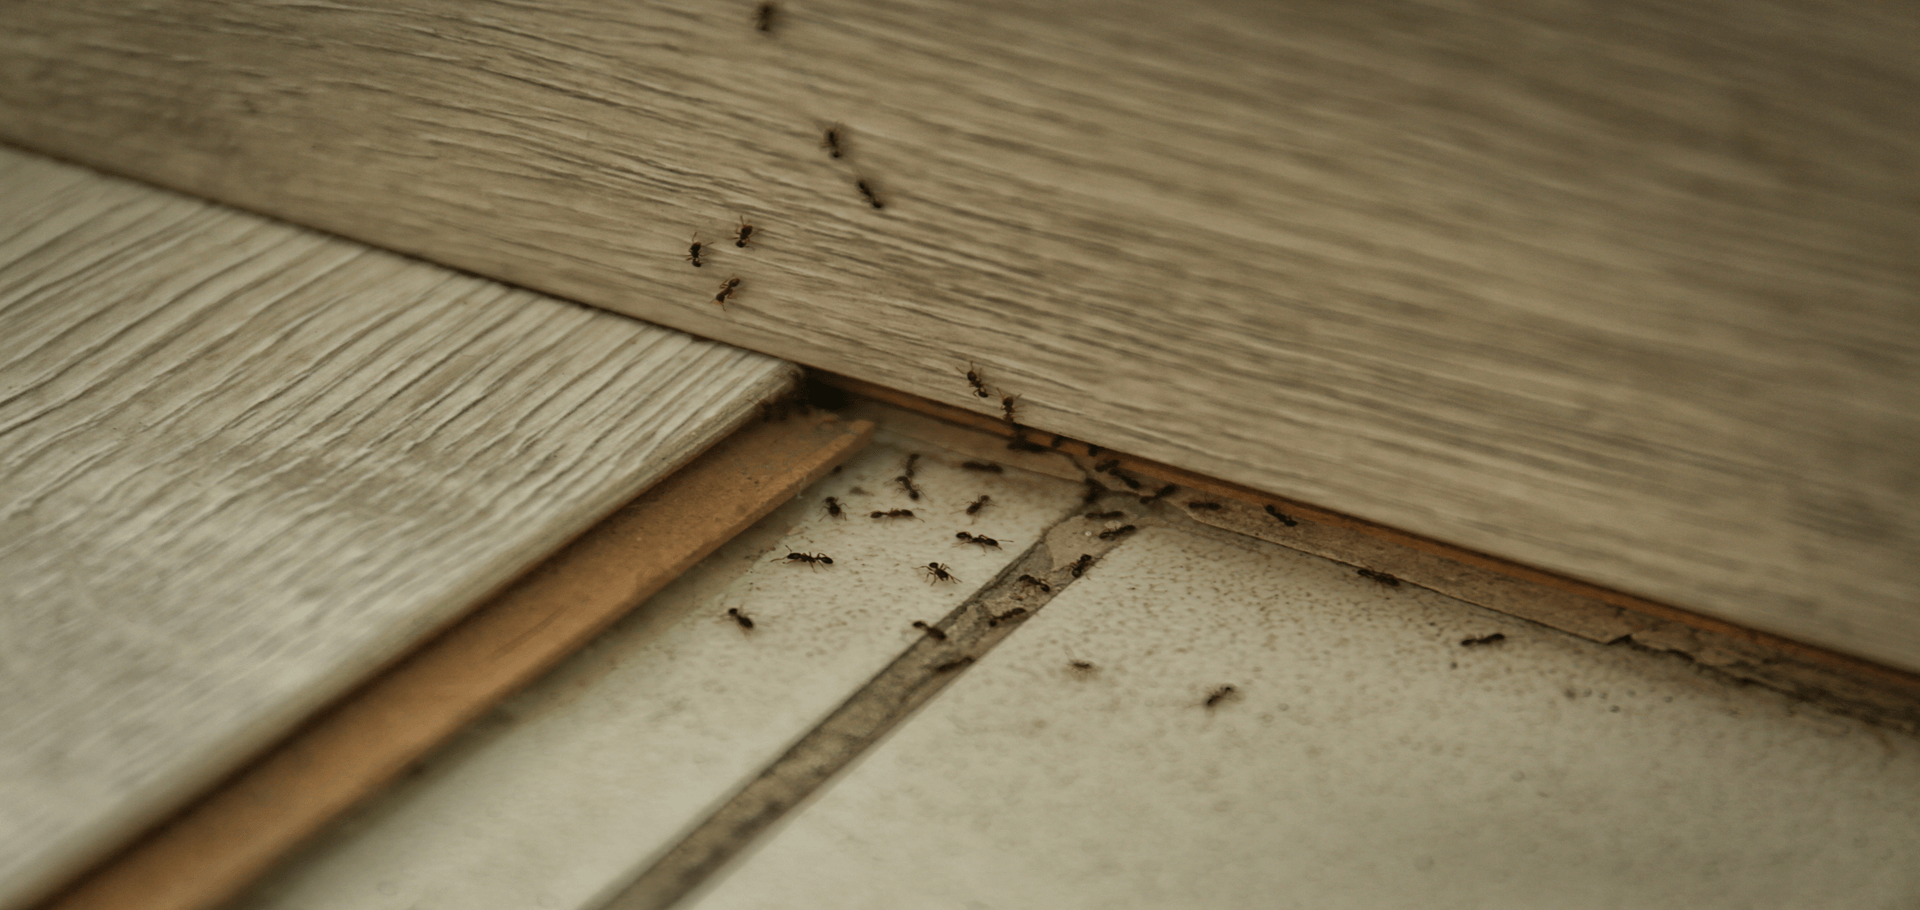 How To Get Rid Of Ants In Your Home And Pantry